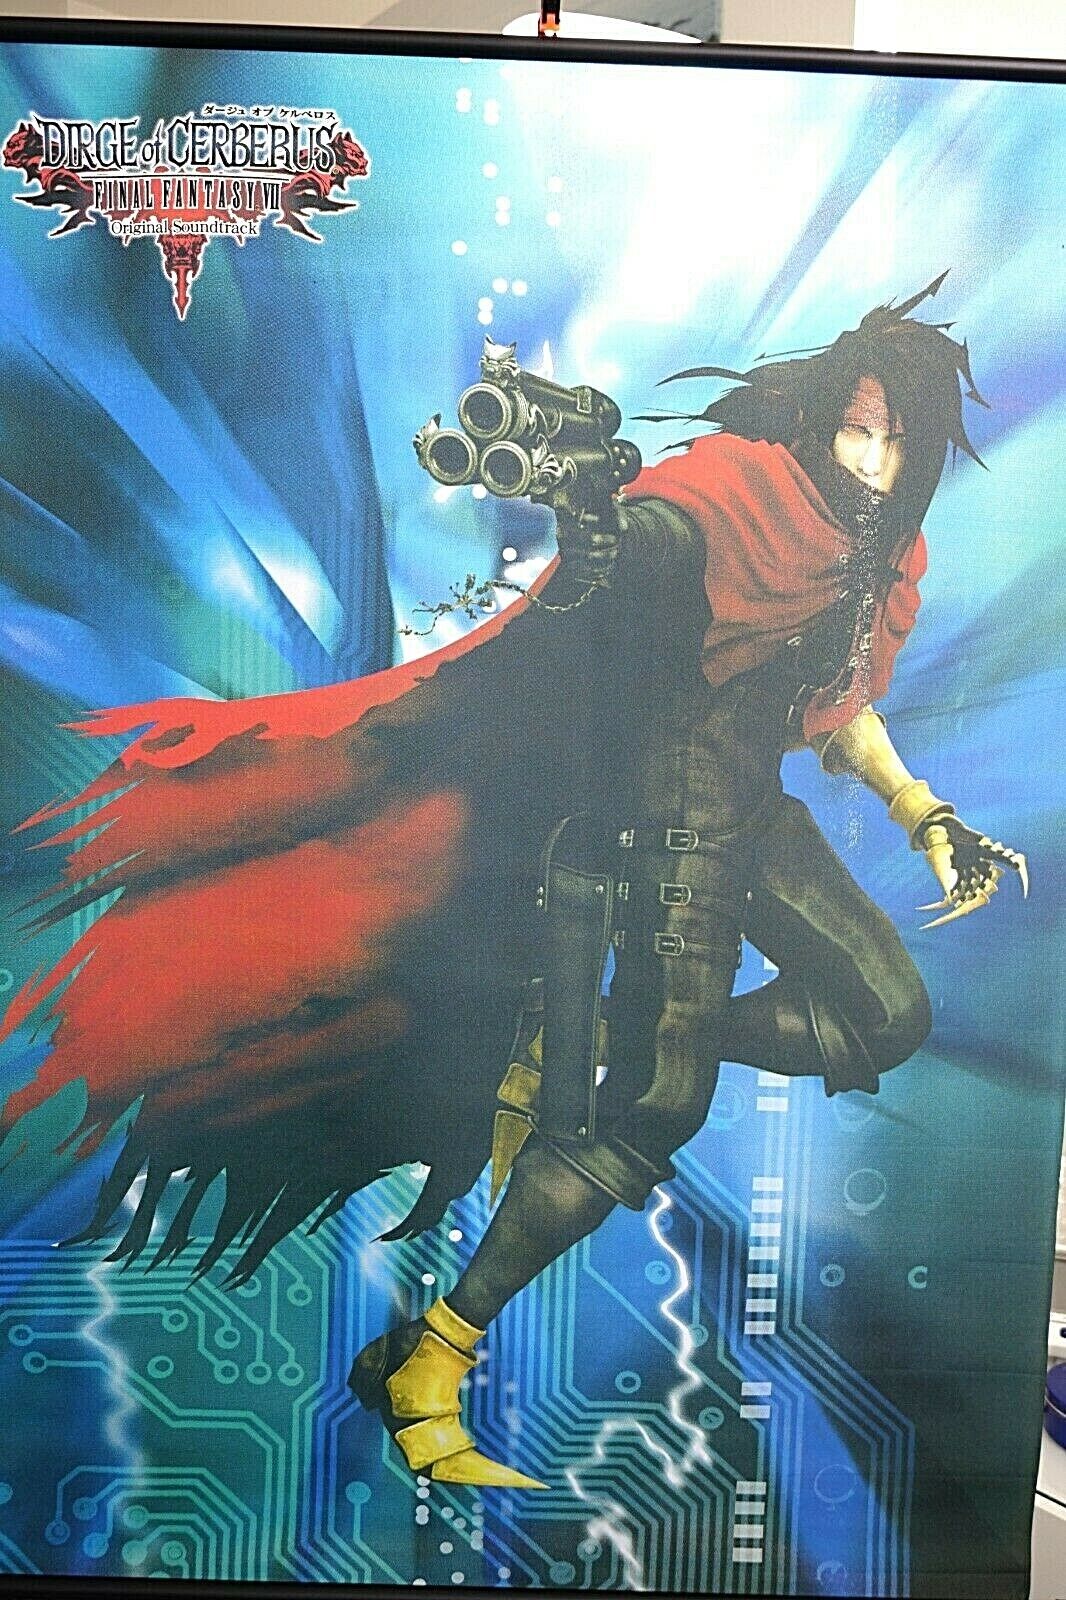  Final Fantasy VINCENT VALENTINE Wall Scroll Poster（43X31 in）- NEW